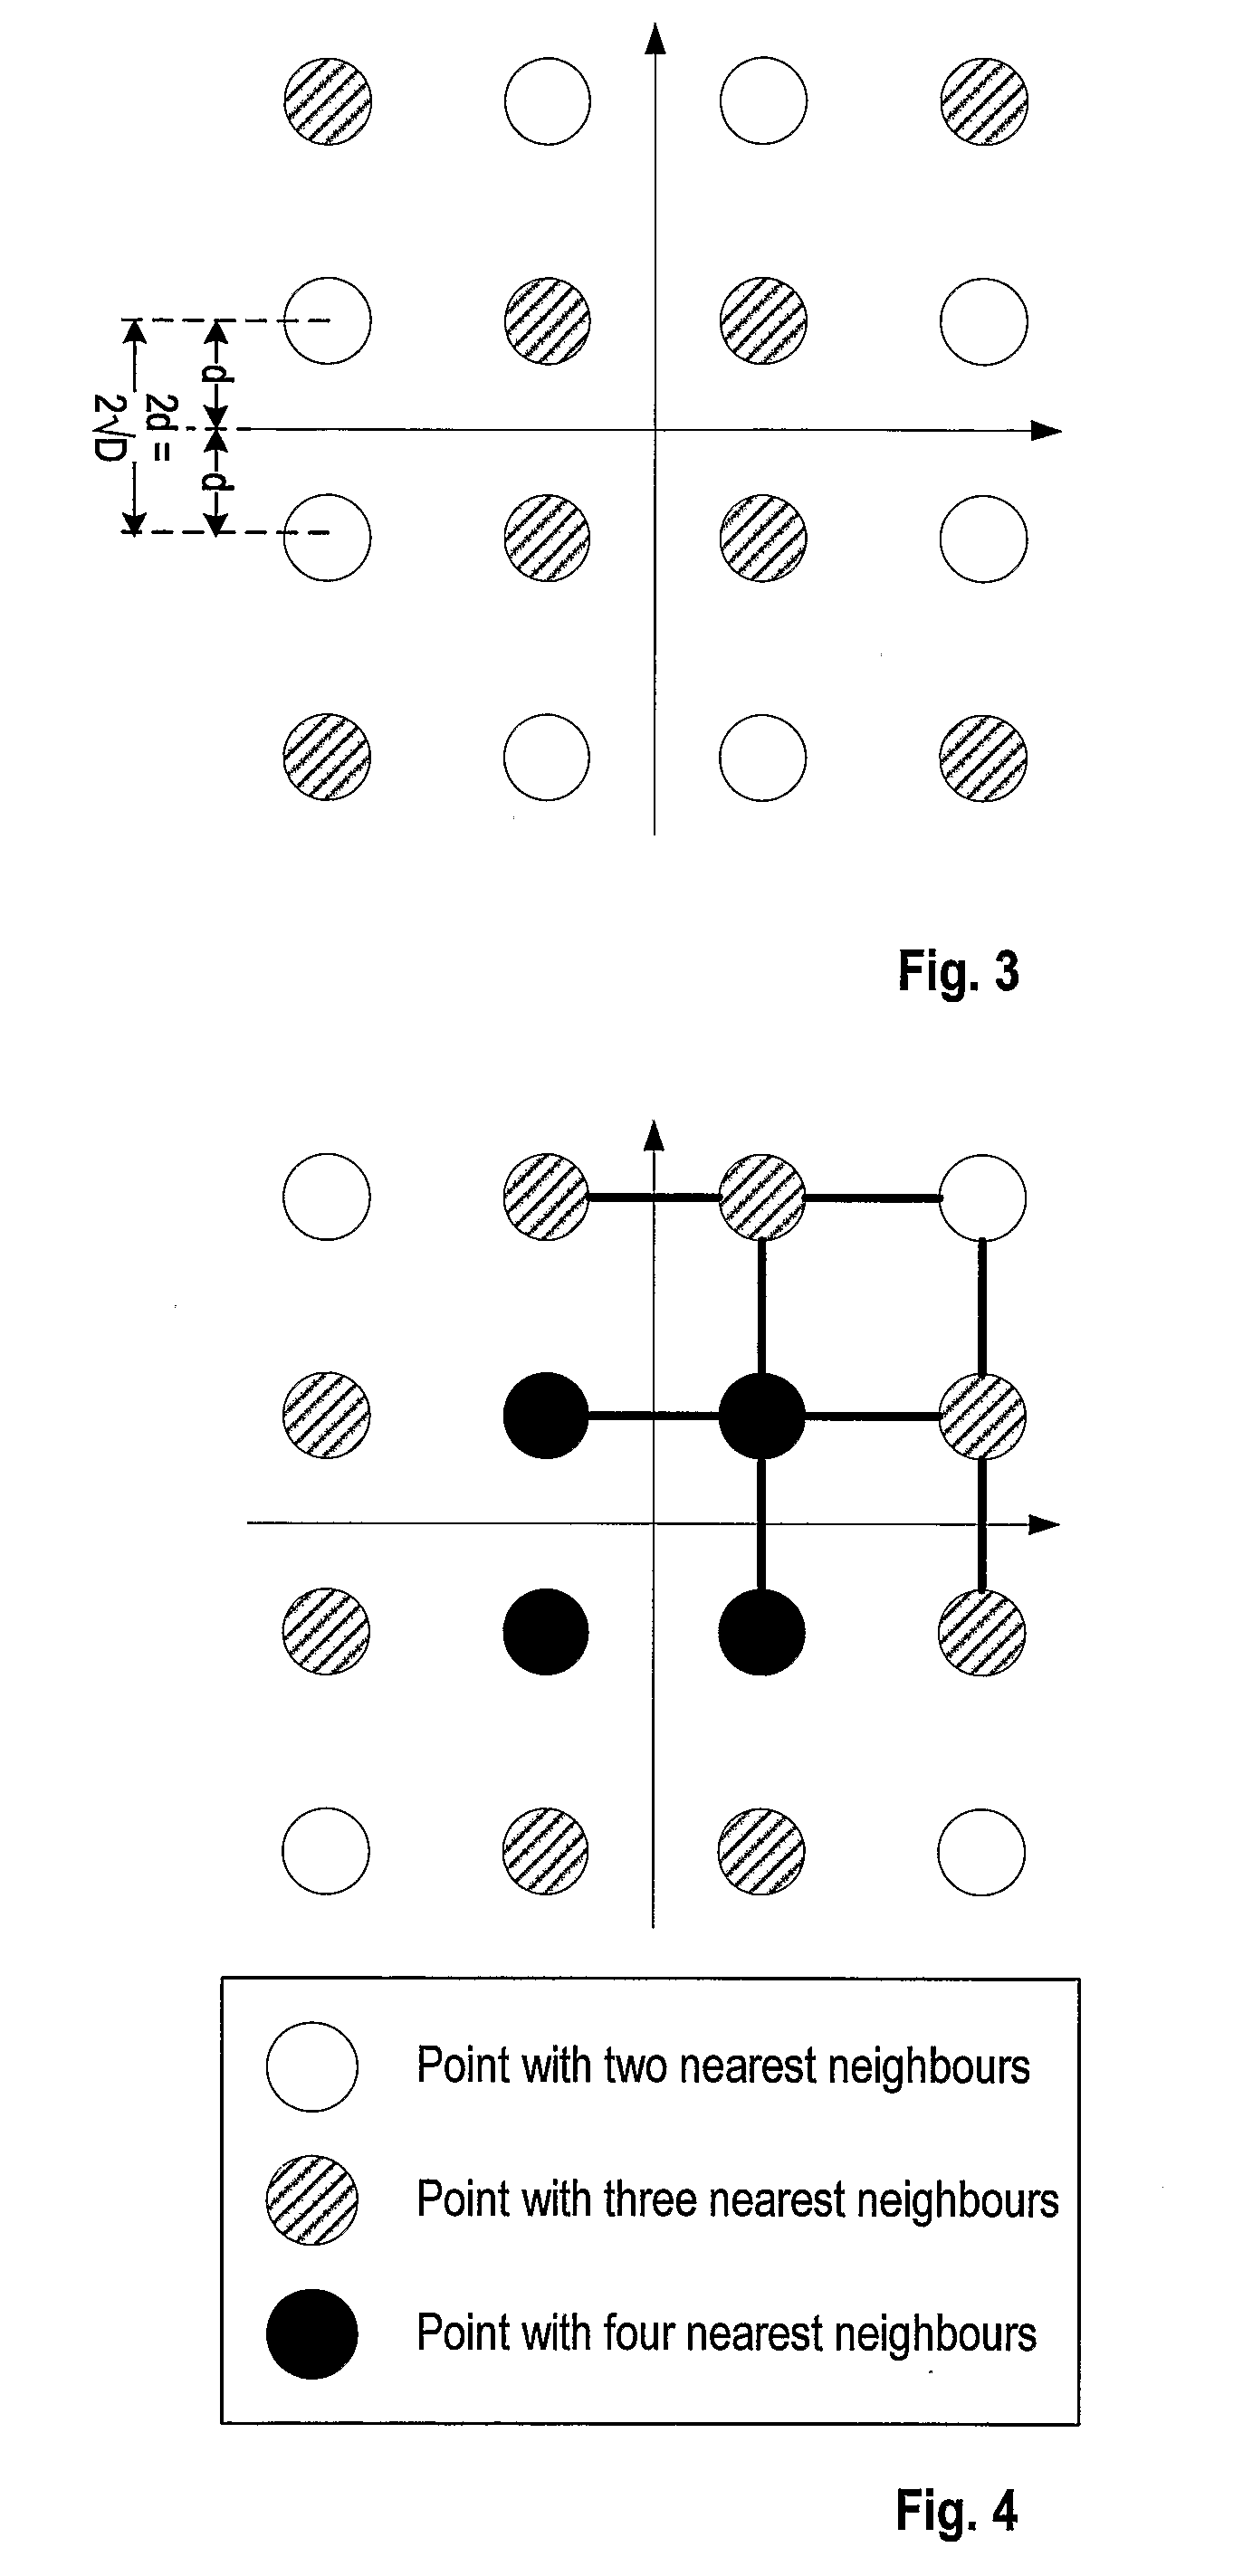 Method for Using a Symbol Mapper Using a Symbol Mapping Scheme to Generate Modulation Symbols According to a Different Symbol Mapping Scheme and a Method for Generating a Symbol Mapping Scheme